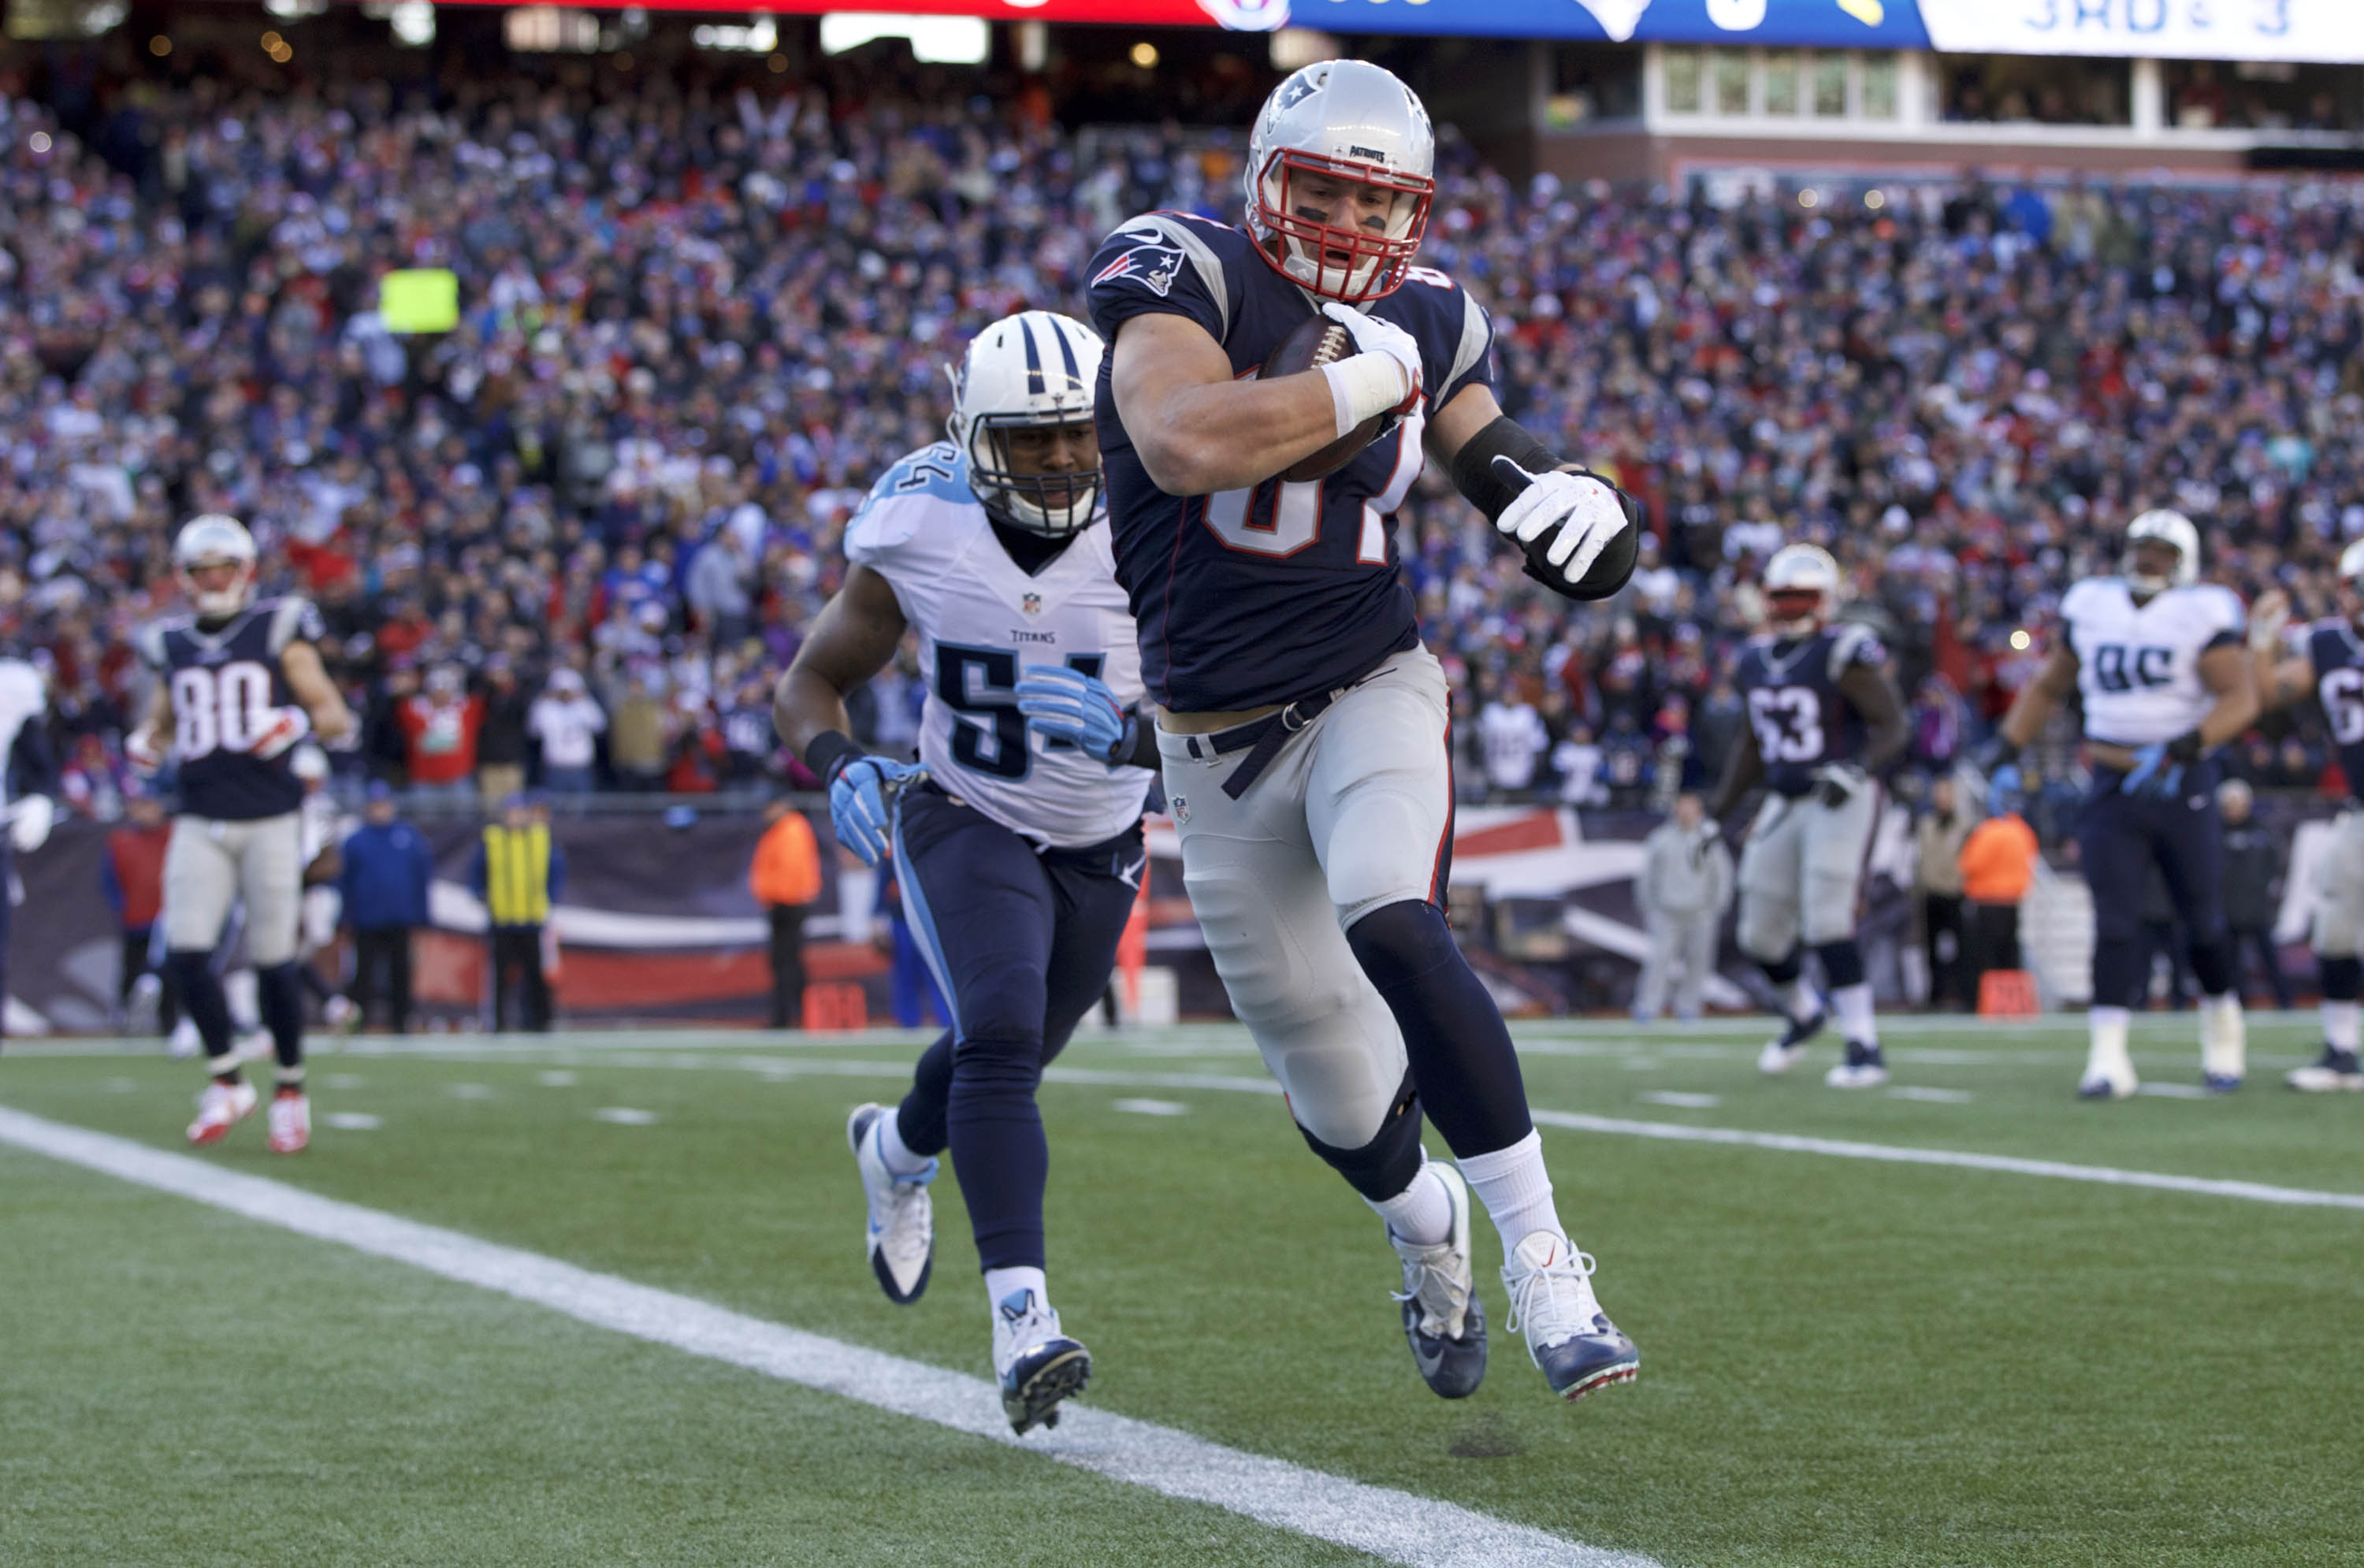 New England Patriots tight end Rob Gronkowski score a touchdown against the Tennessee Titans at Gillette Stadium in Foxborough, Mass., on Dec. 20, 2015 (David Butler—USA Today Sports/Reuters)